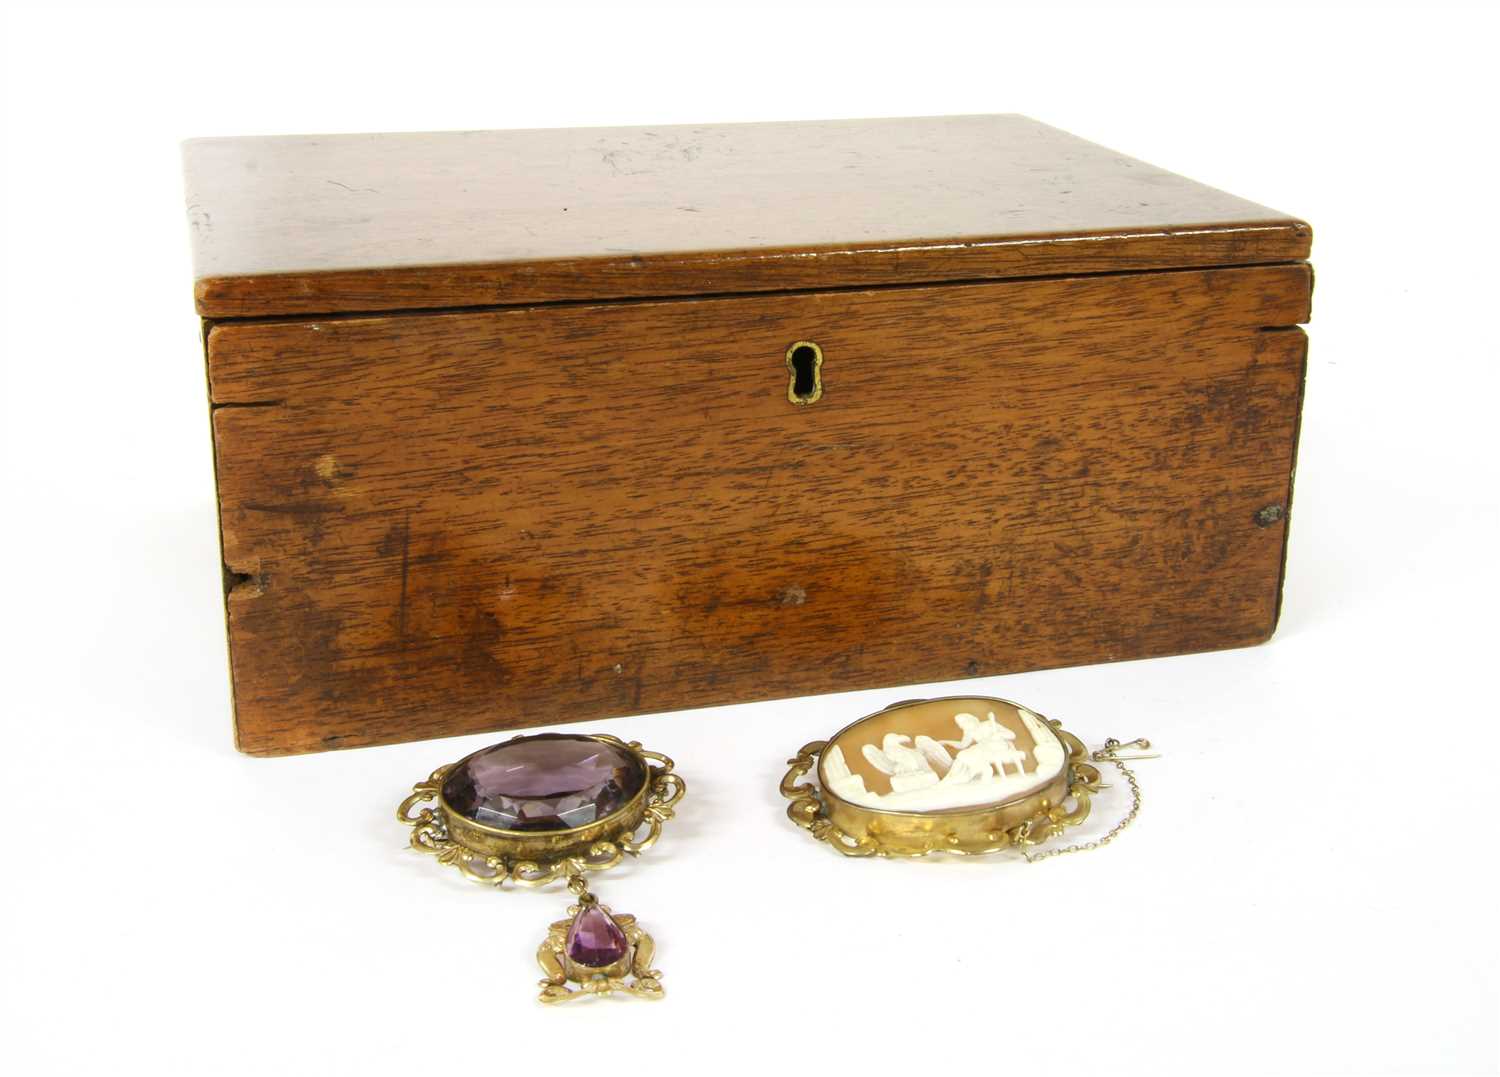 Lot 3 - A Victorian rolled gold amethyst brooch with drop pendant